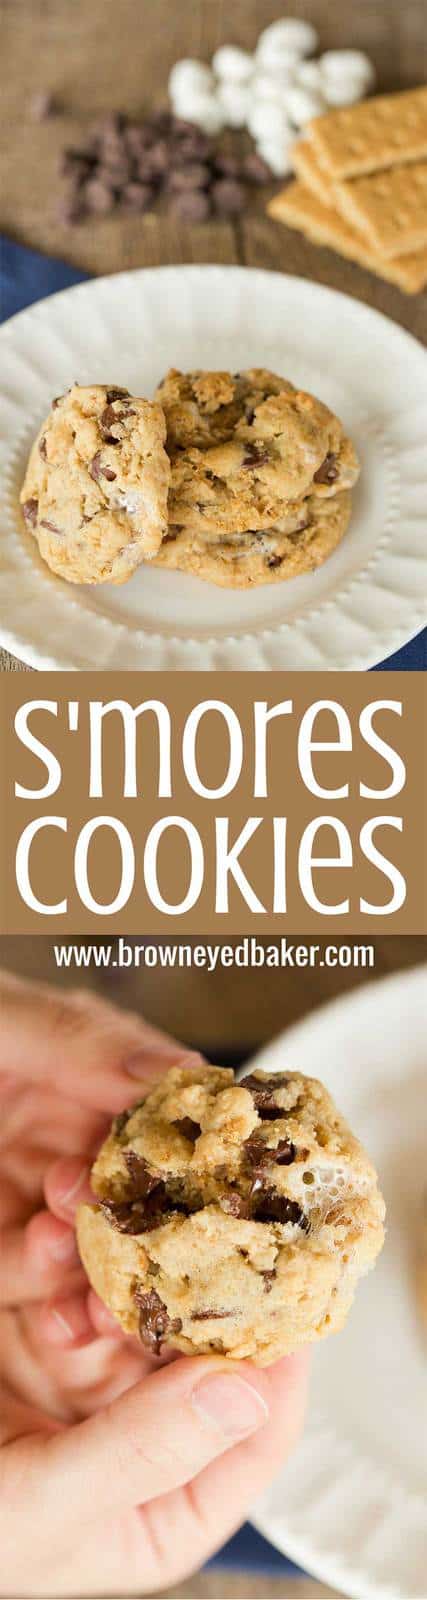 S'mores Cookies made with graham cracker crumbs, mini marshmallows and milk chocolate chips! | browneyedbaker.com